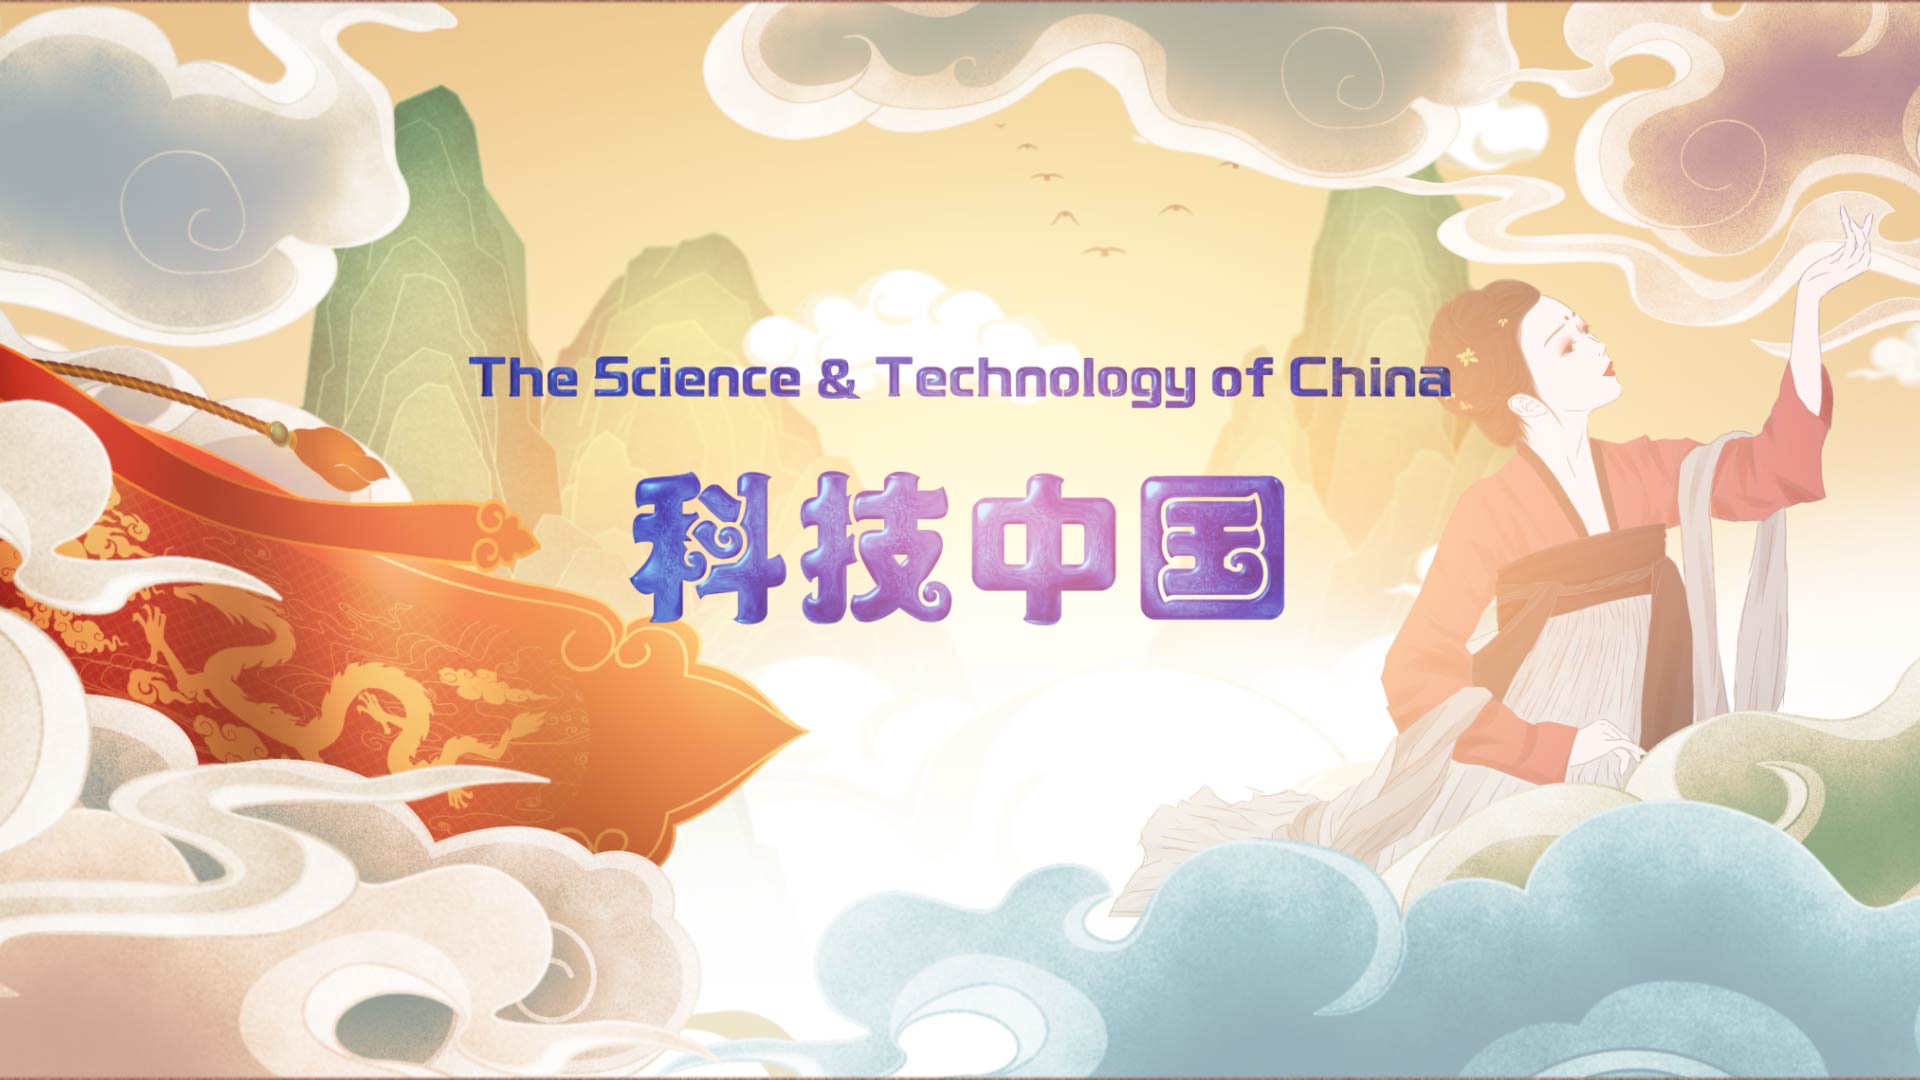 The Science & Technology of China